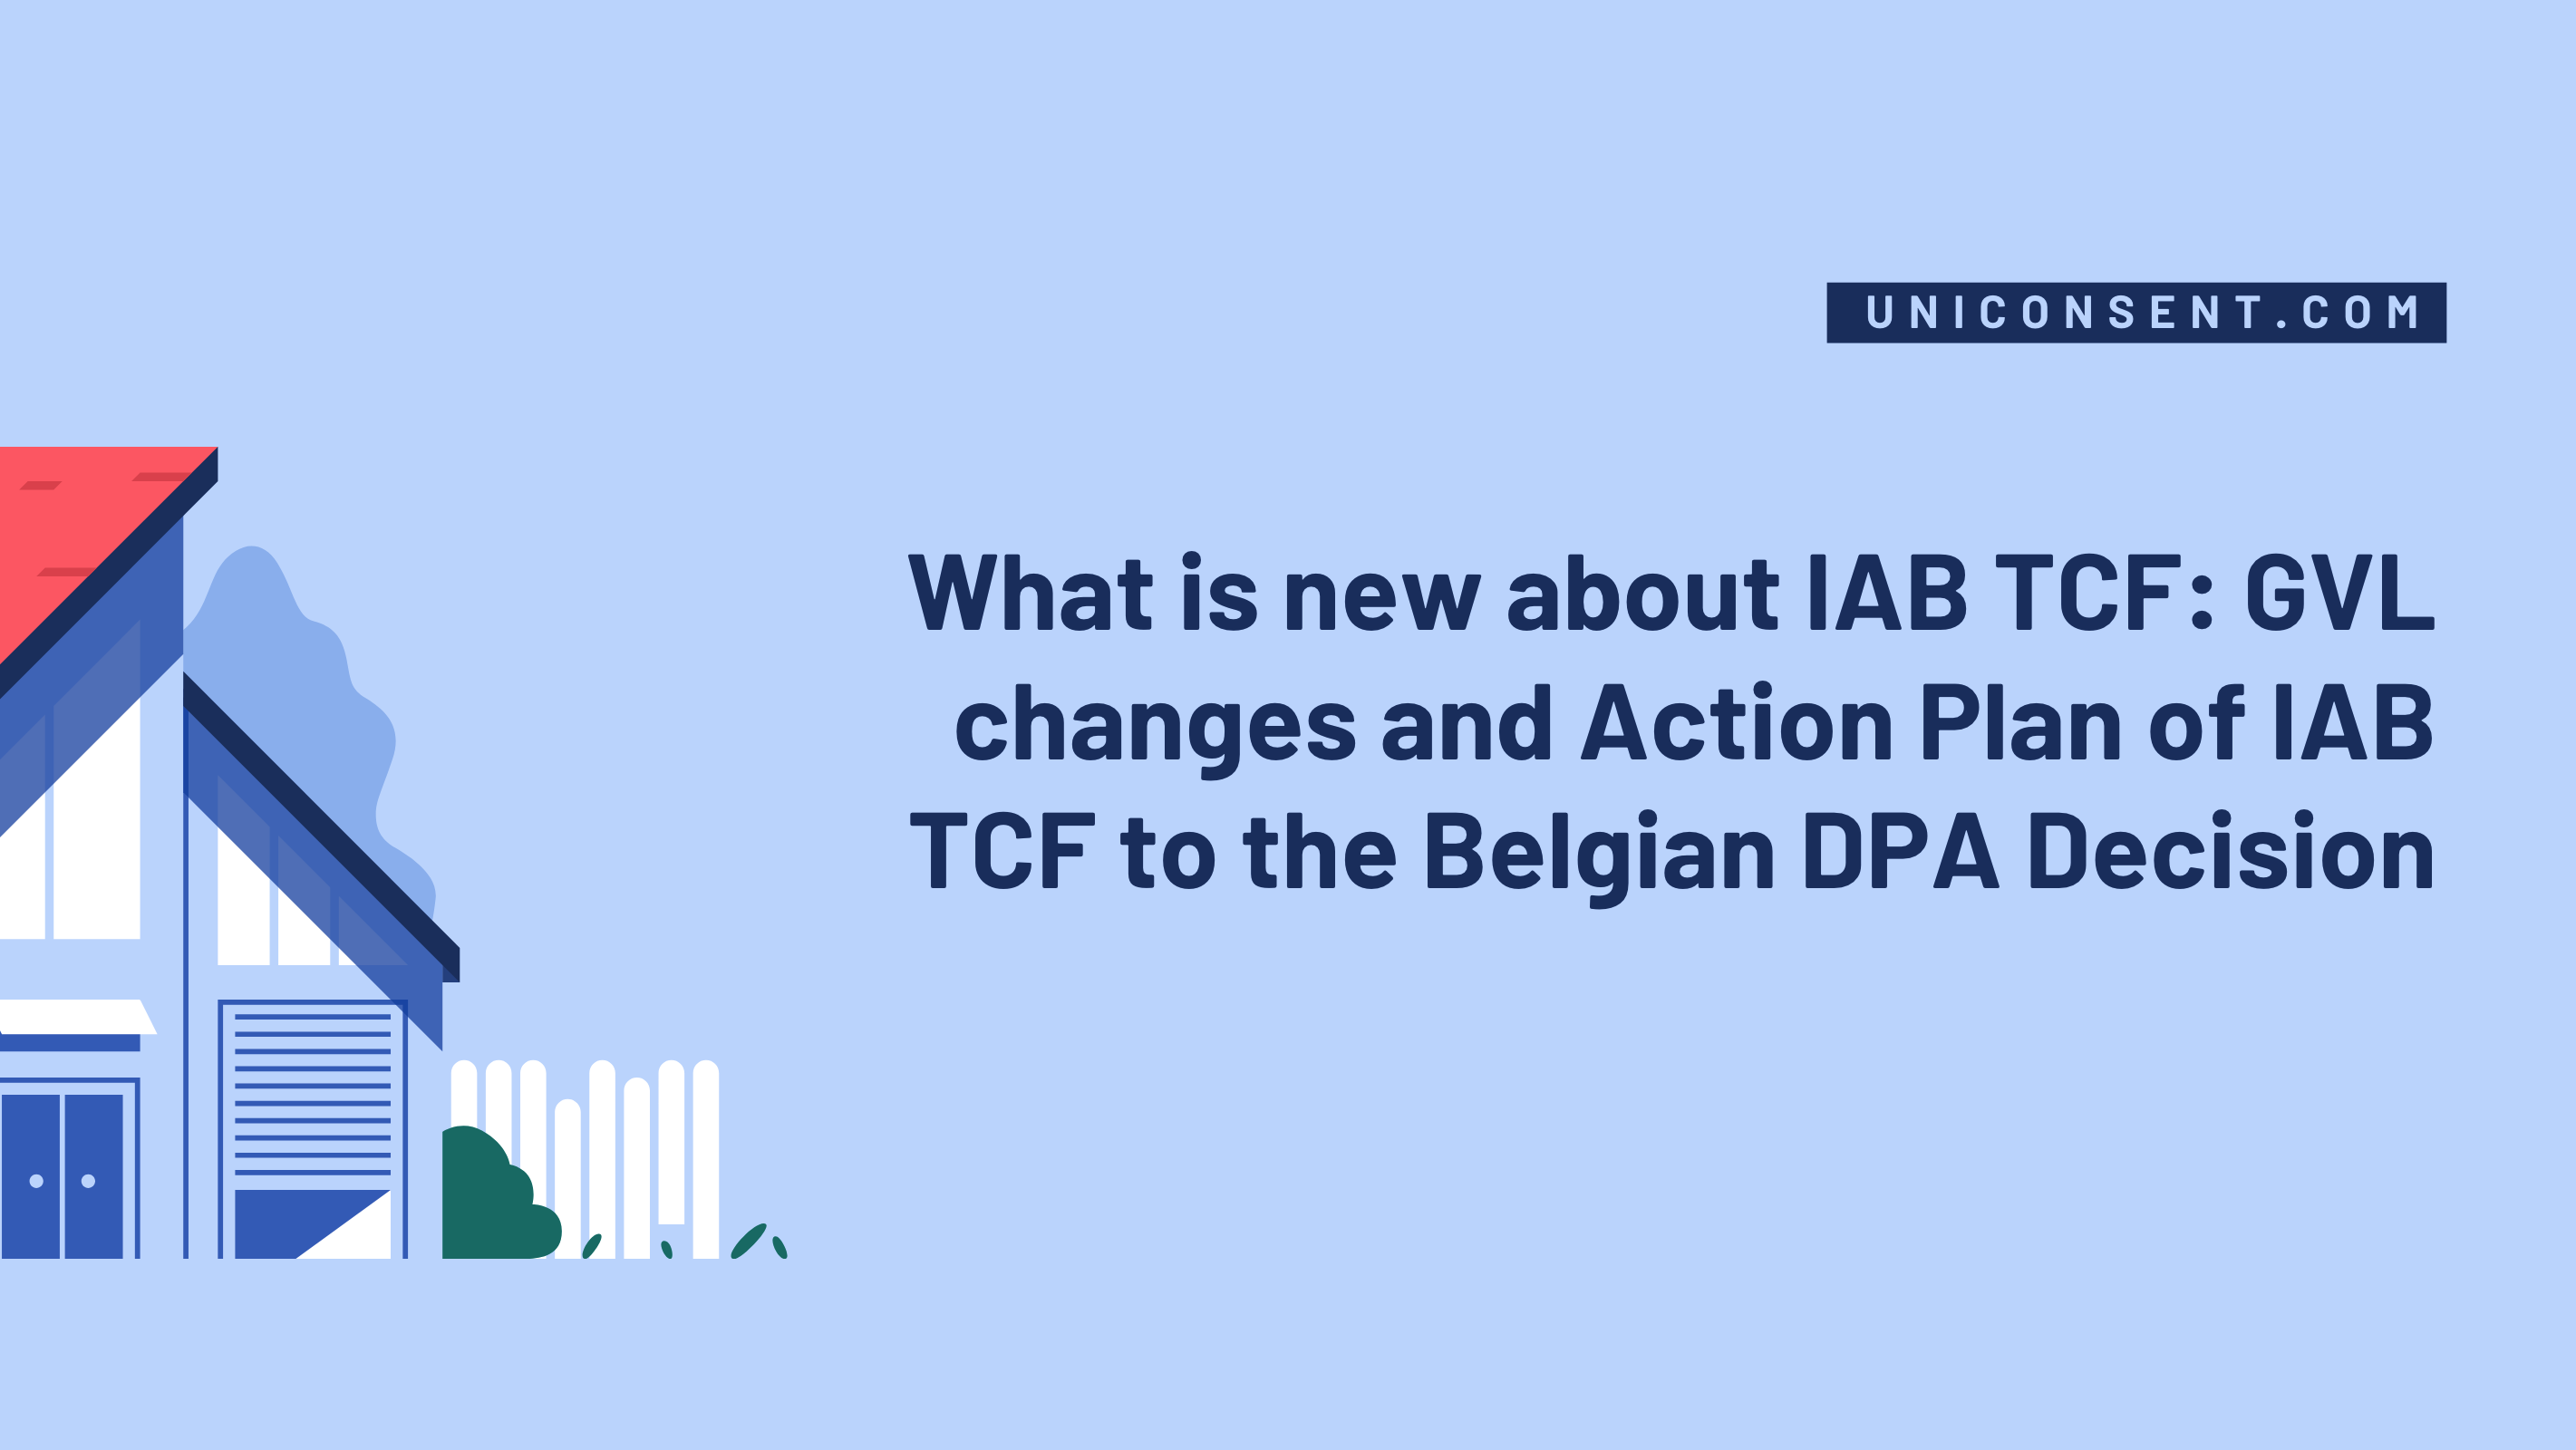 What is new about IAB TCF: GVL changes and Action Plan of IAB TCF to the Belgian DPA Decision